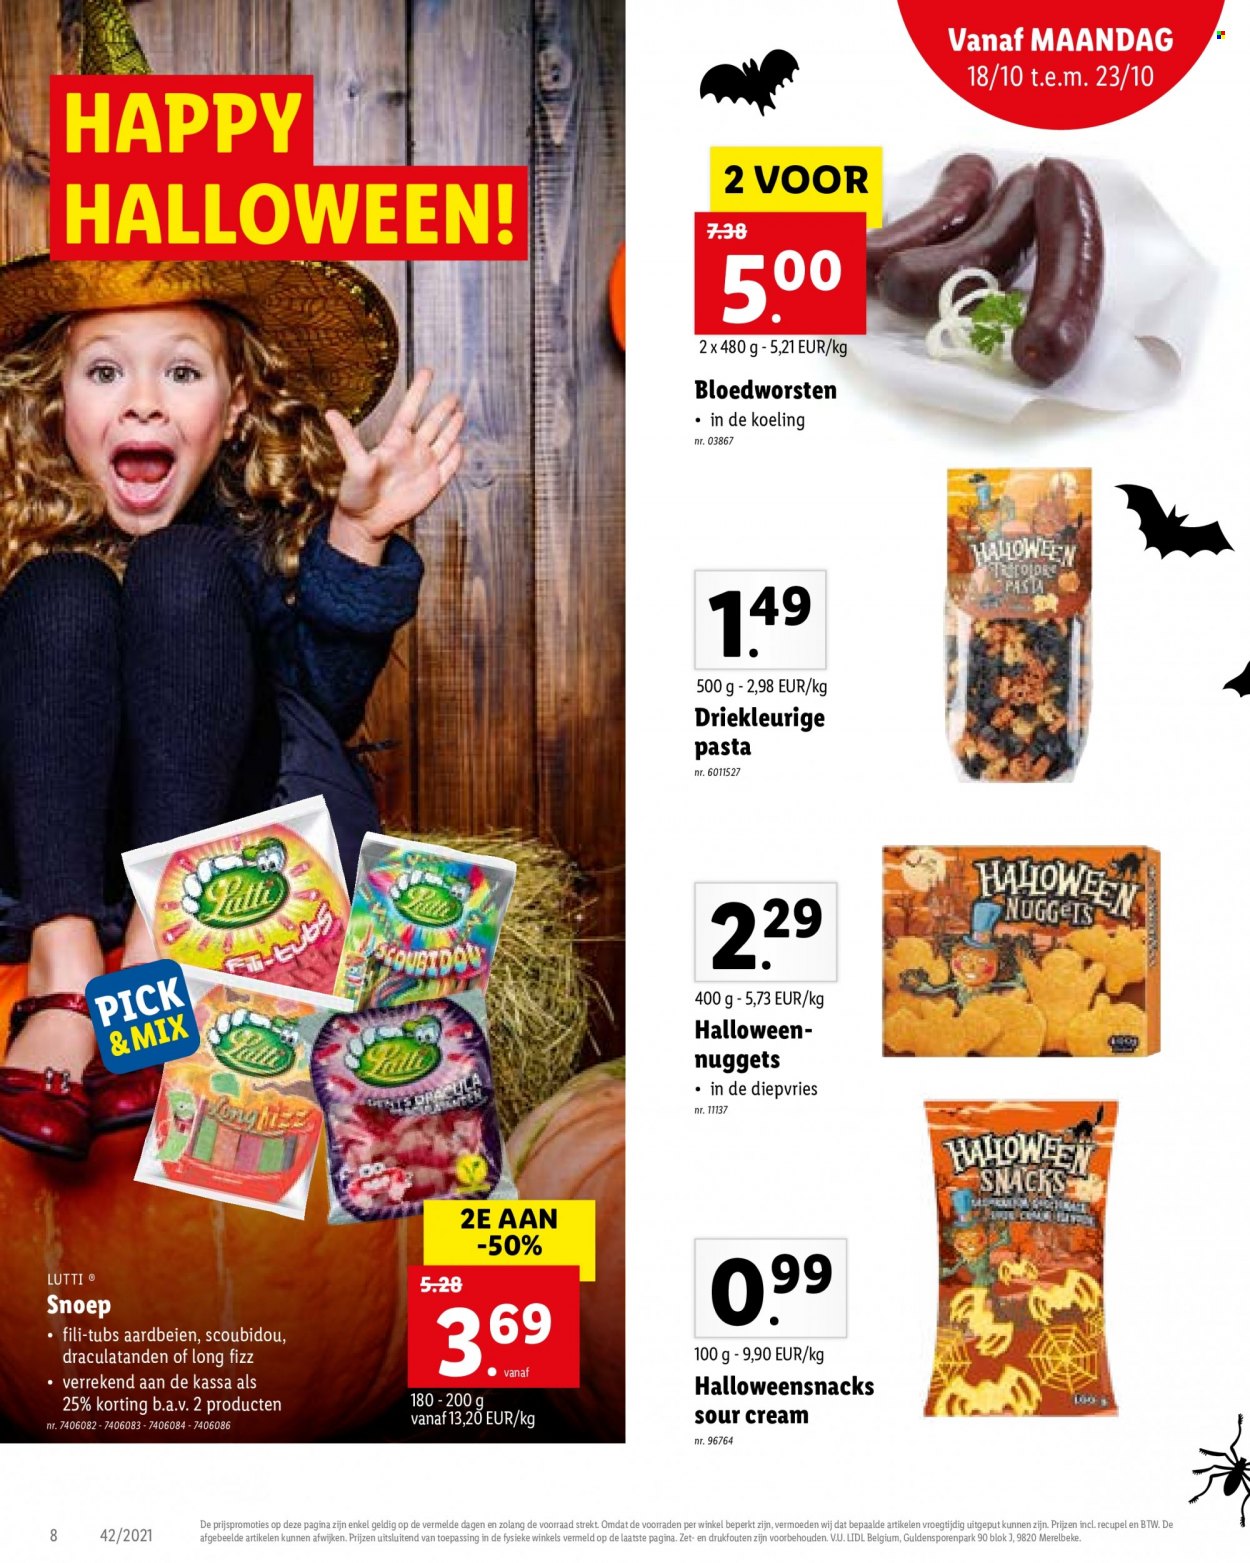 Catalogue Lidl - 18.10.2021 - 23.10.2021. Page 8.